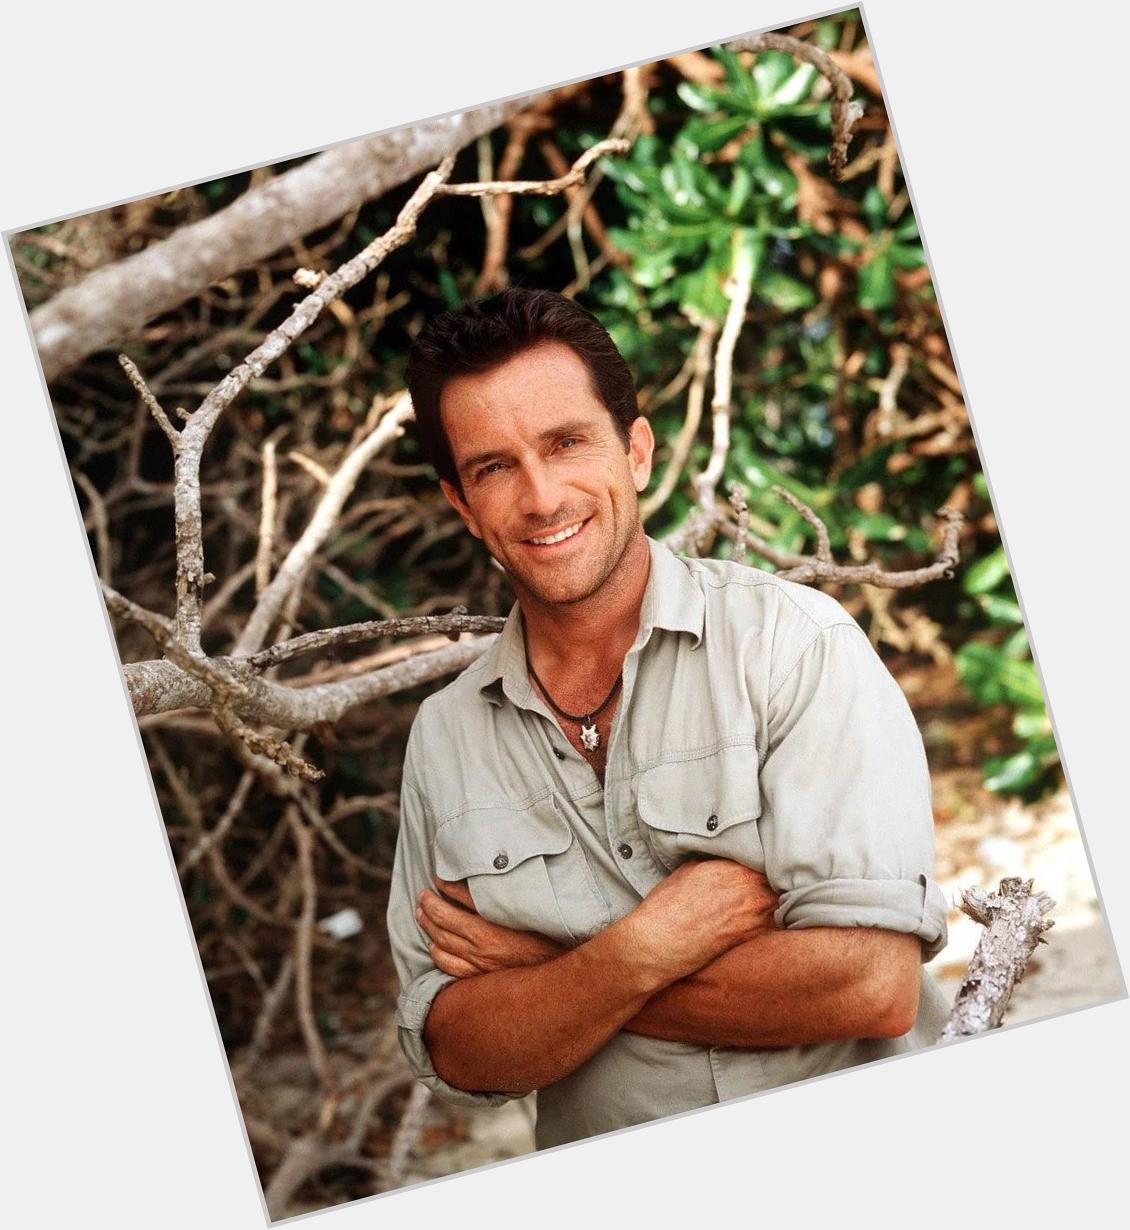 Happy Birthday to Jeff Probst, who turns 53 today! 